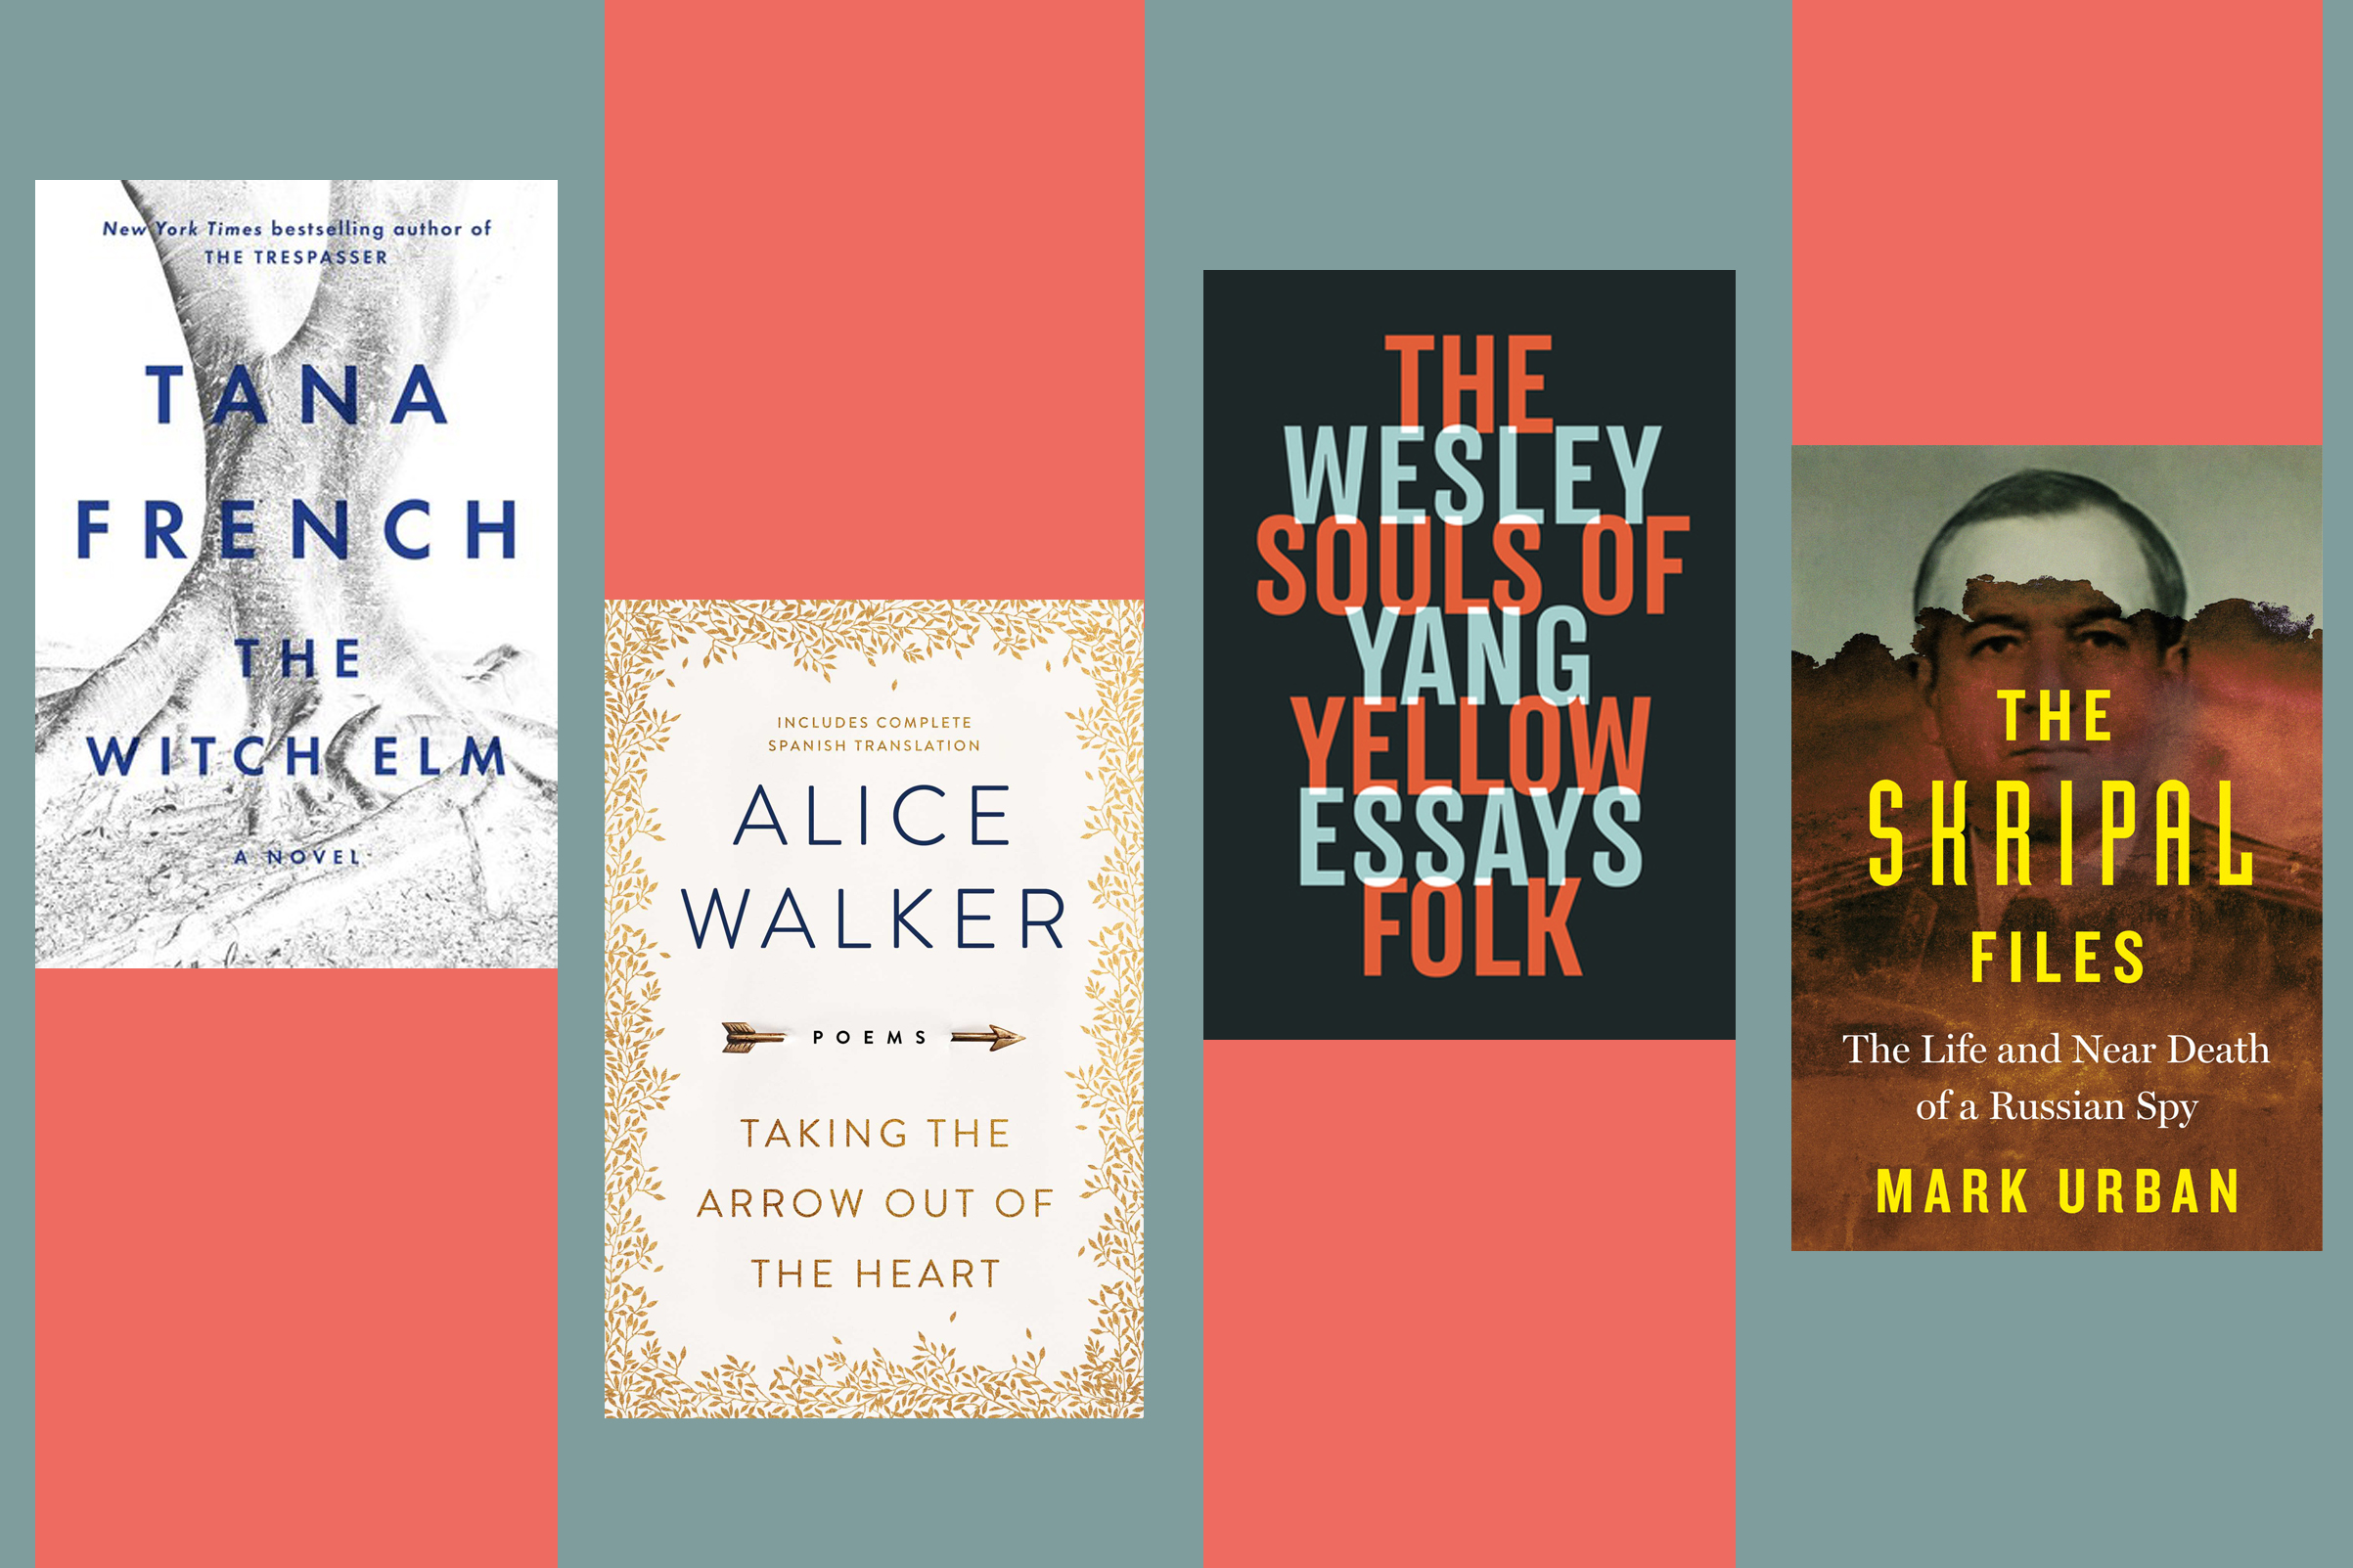 What to Read in October